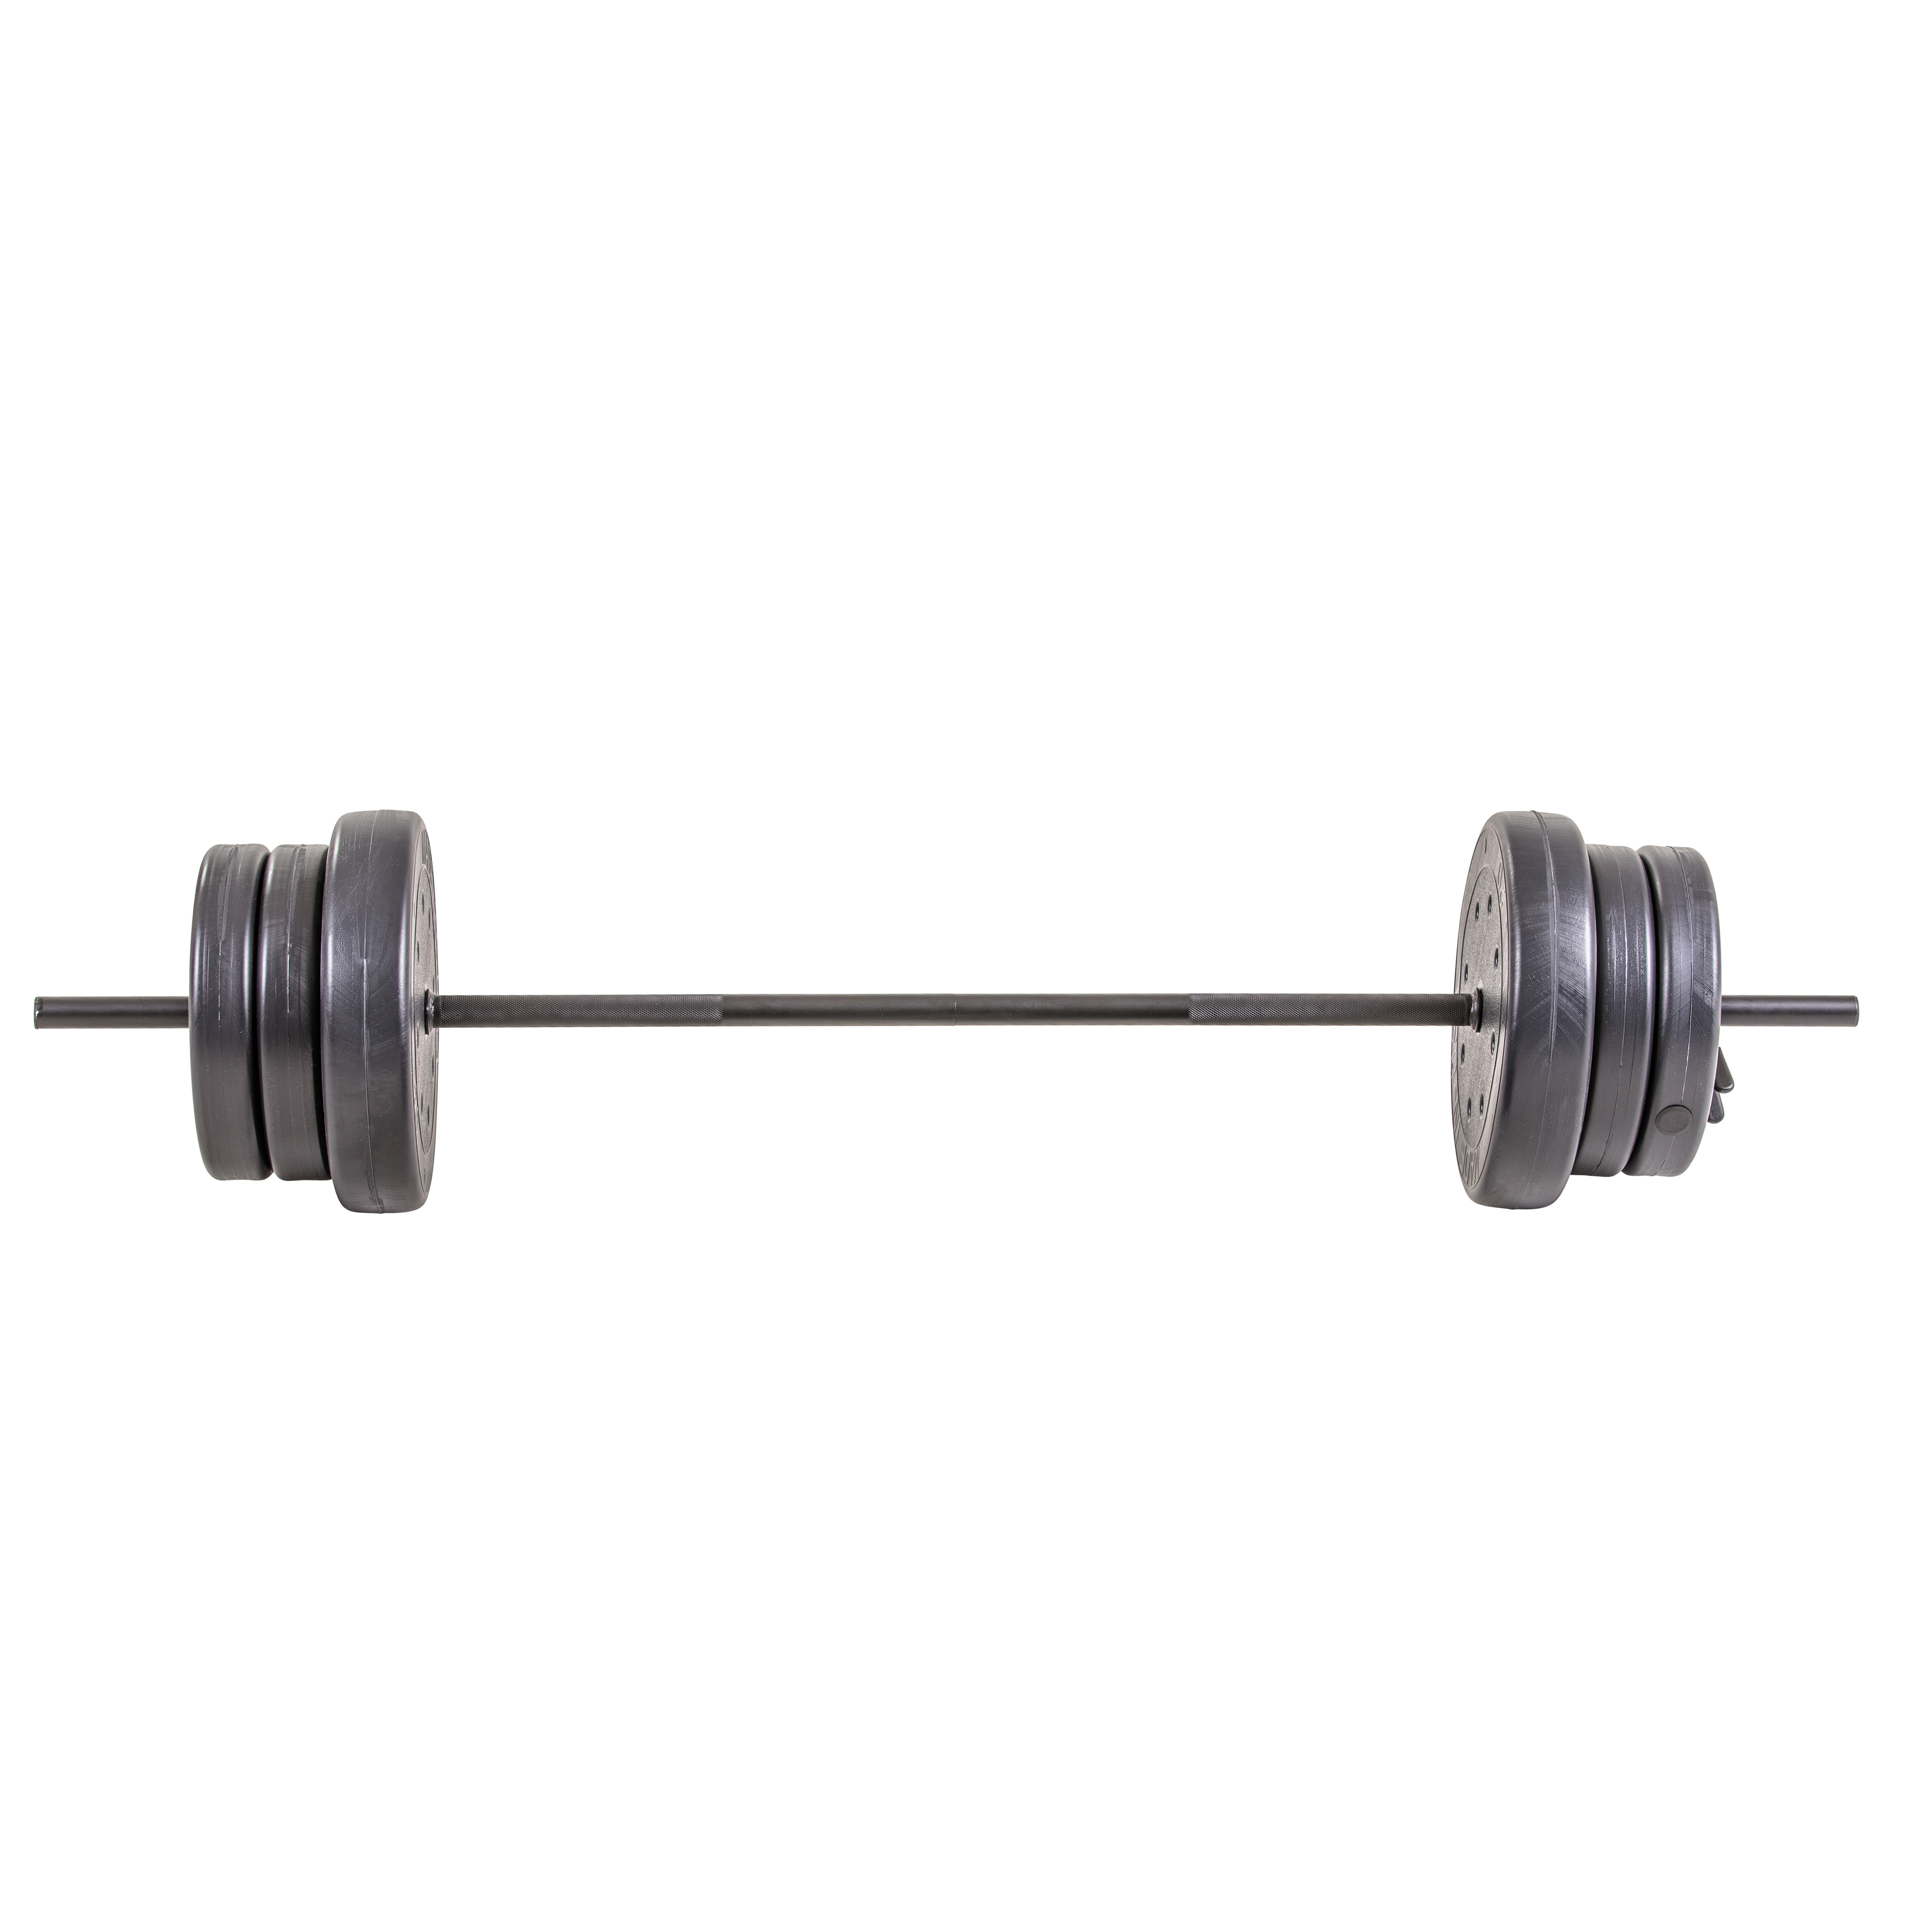 US Weight Duracast 55 lb. Barbell Weight Set with Threaded Barbell Bar, Locking Spring Clips - image 1 of 19